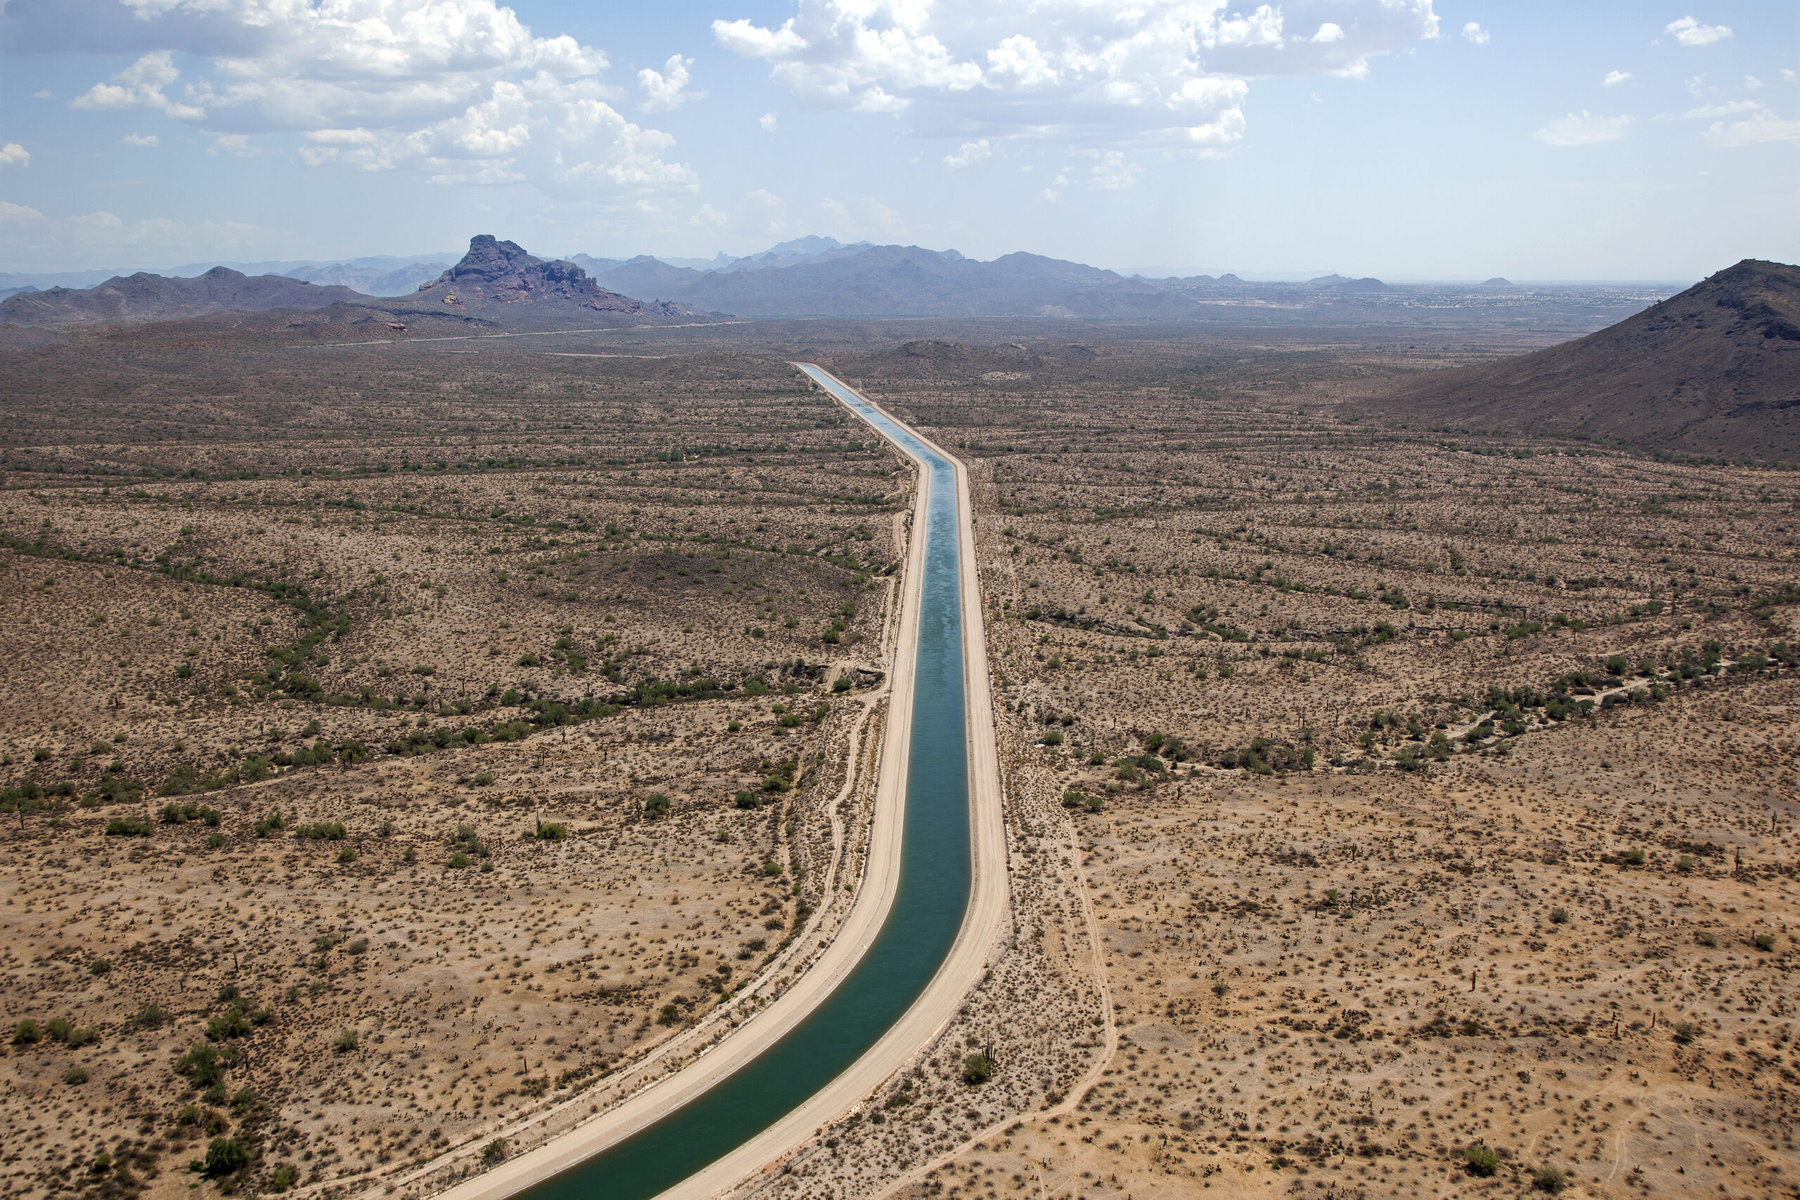 A view of the Central Arizona Project carrying water through the Arizona desert with mountains in the background.